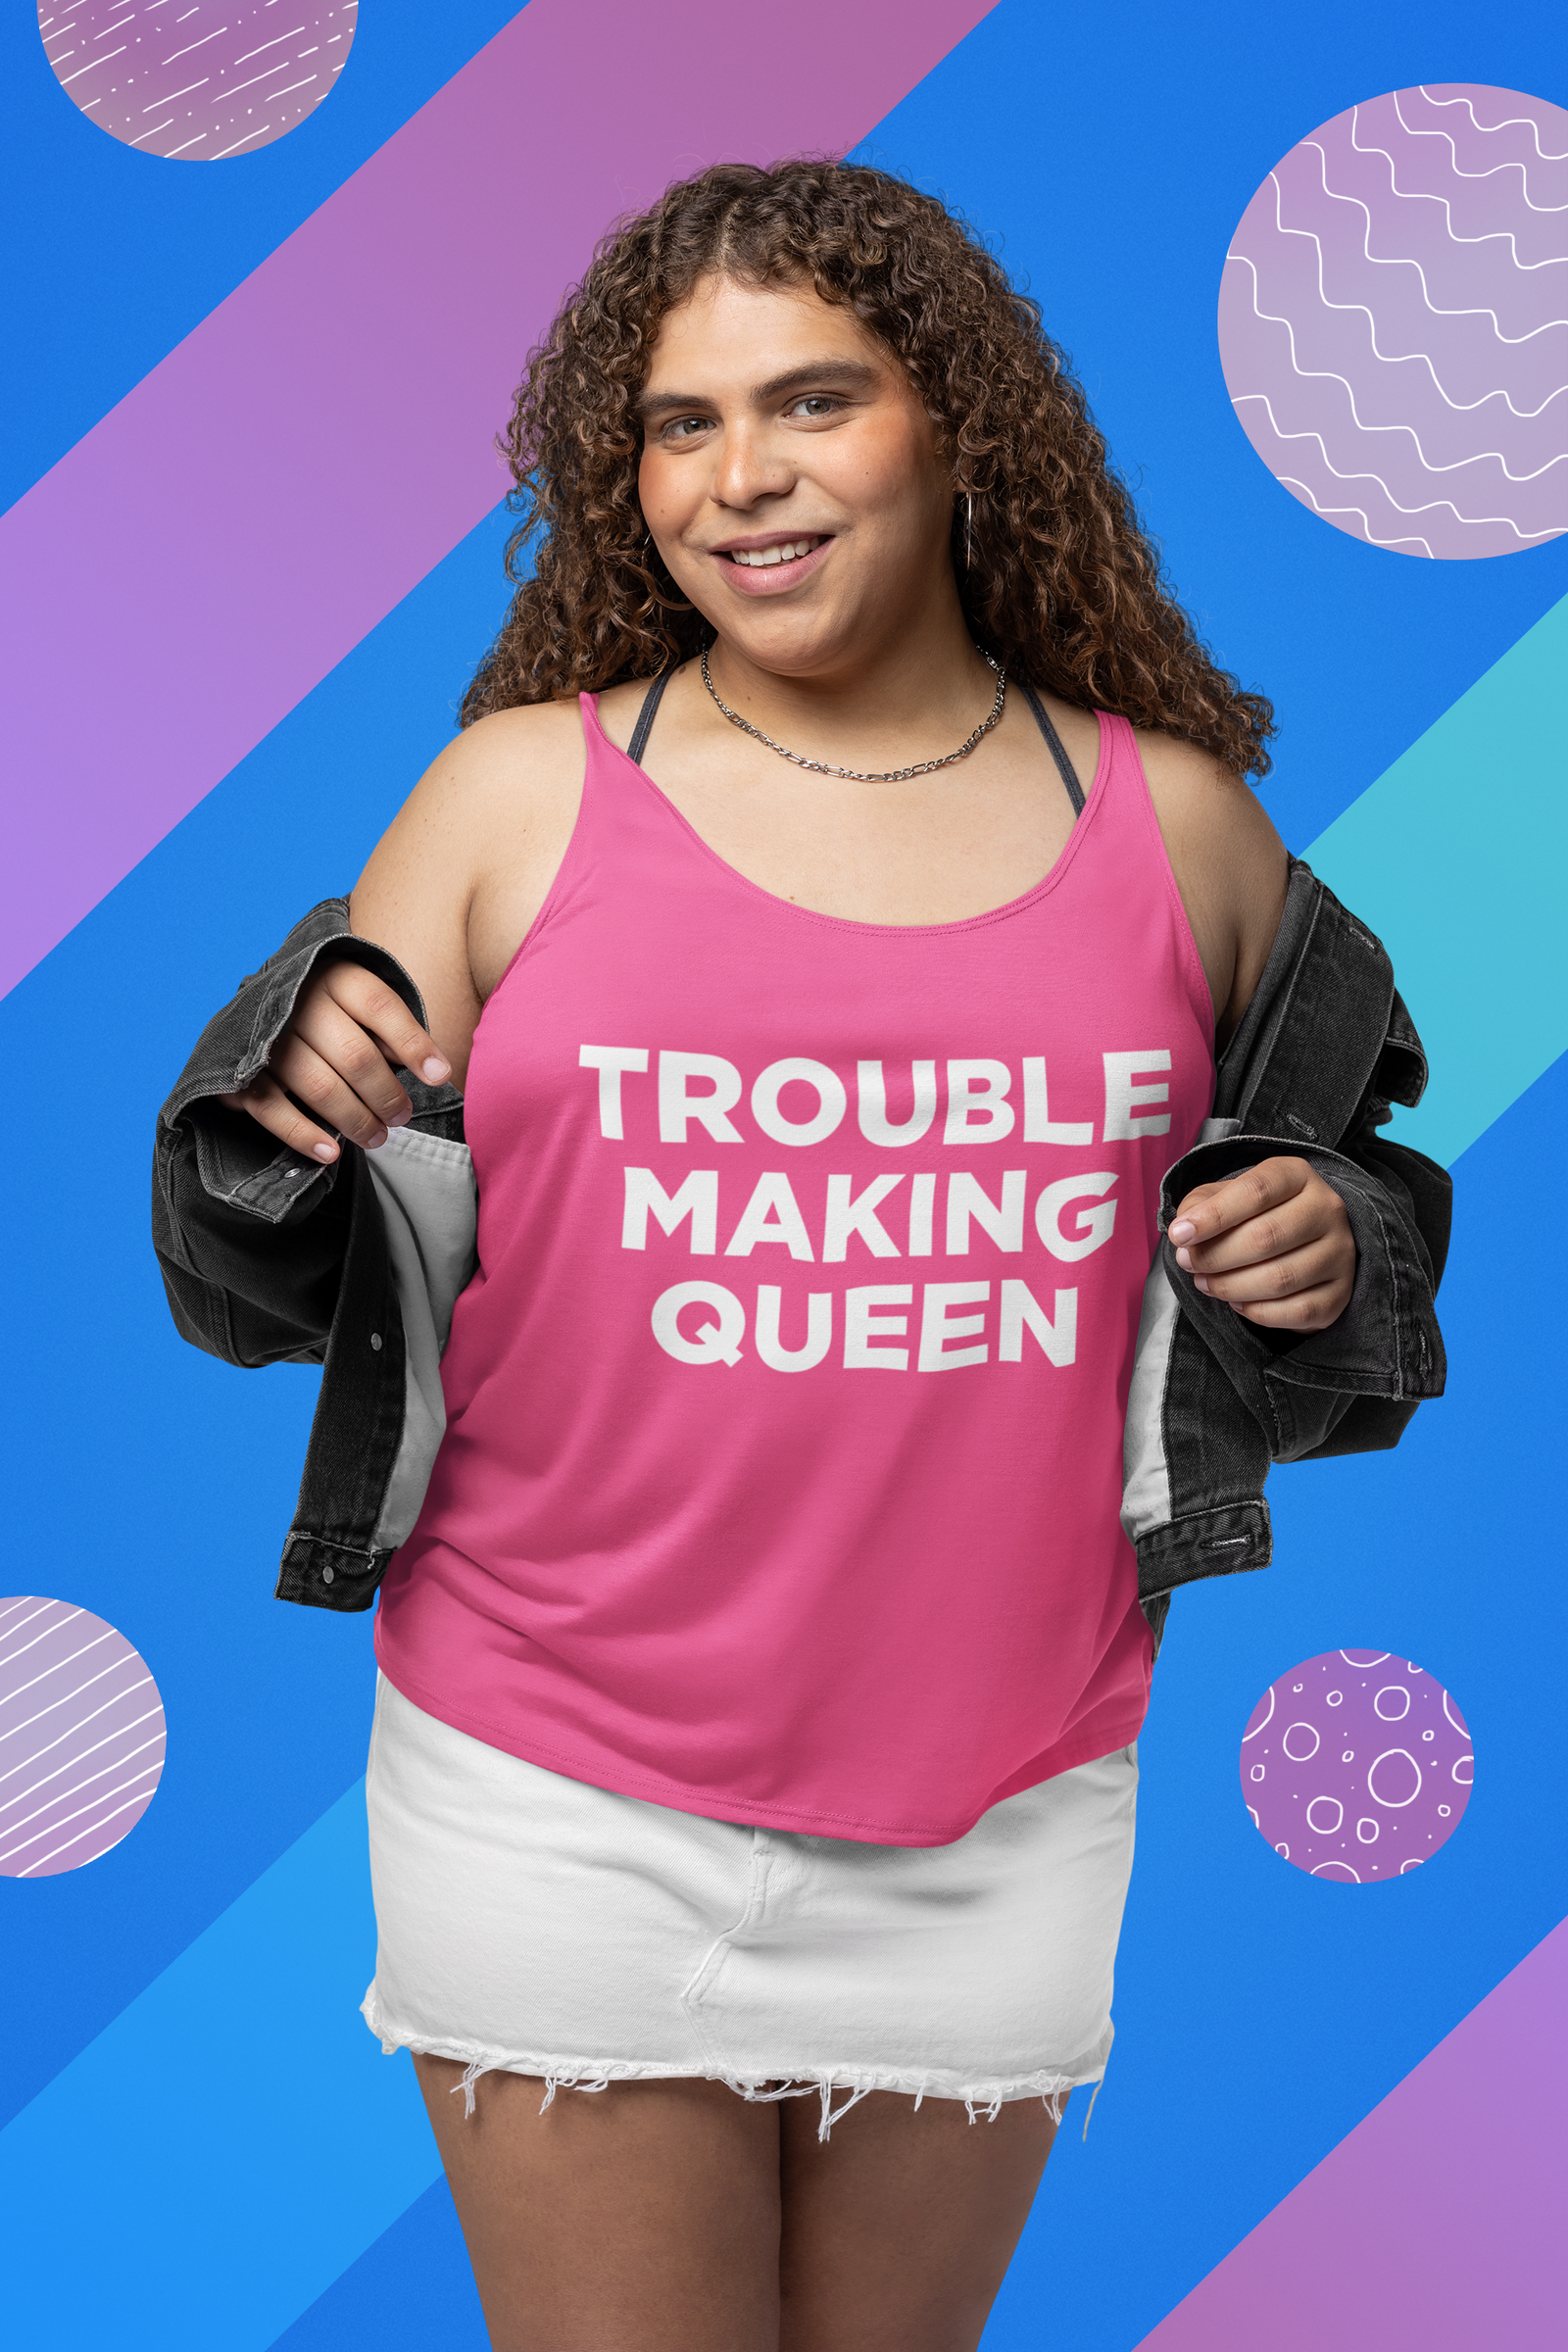 Trouble Making Queen Material Girl Celebration Racerback Tank Top for Women